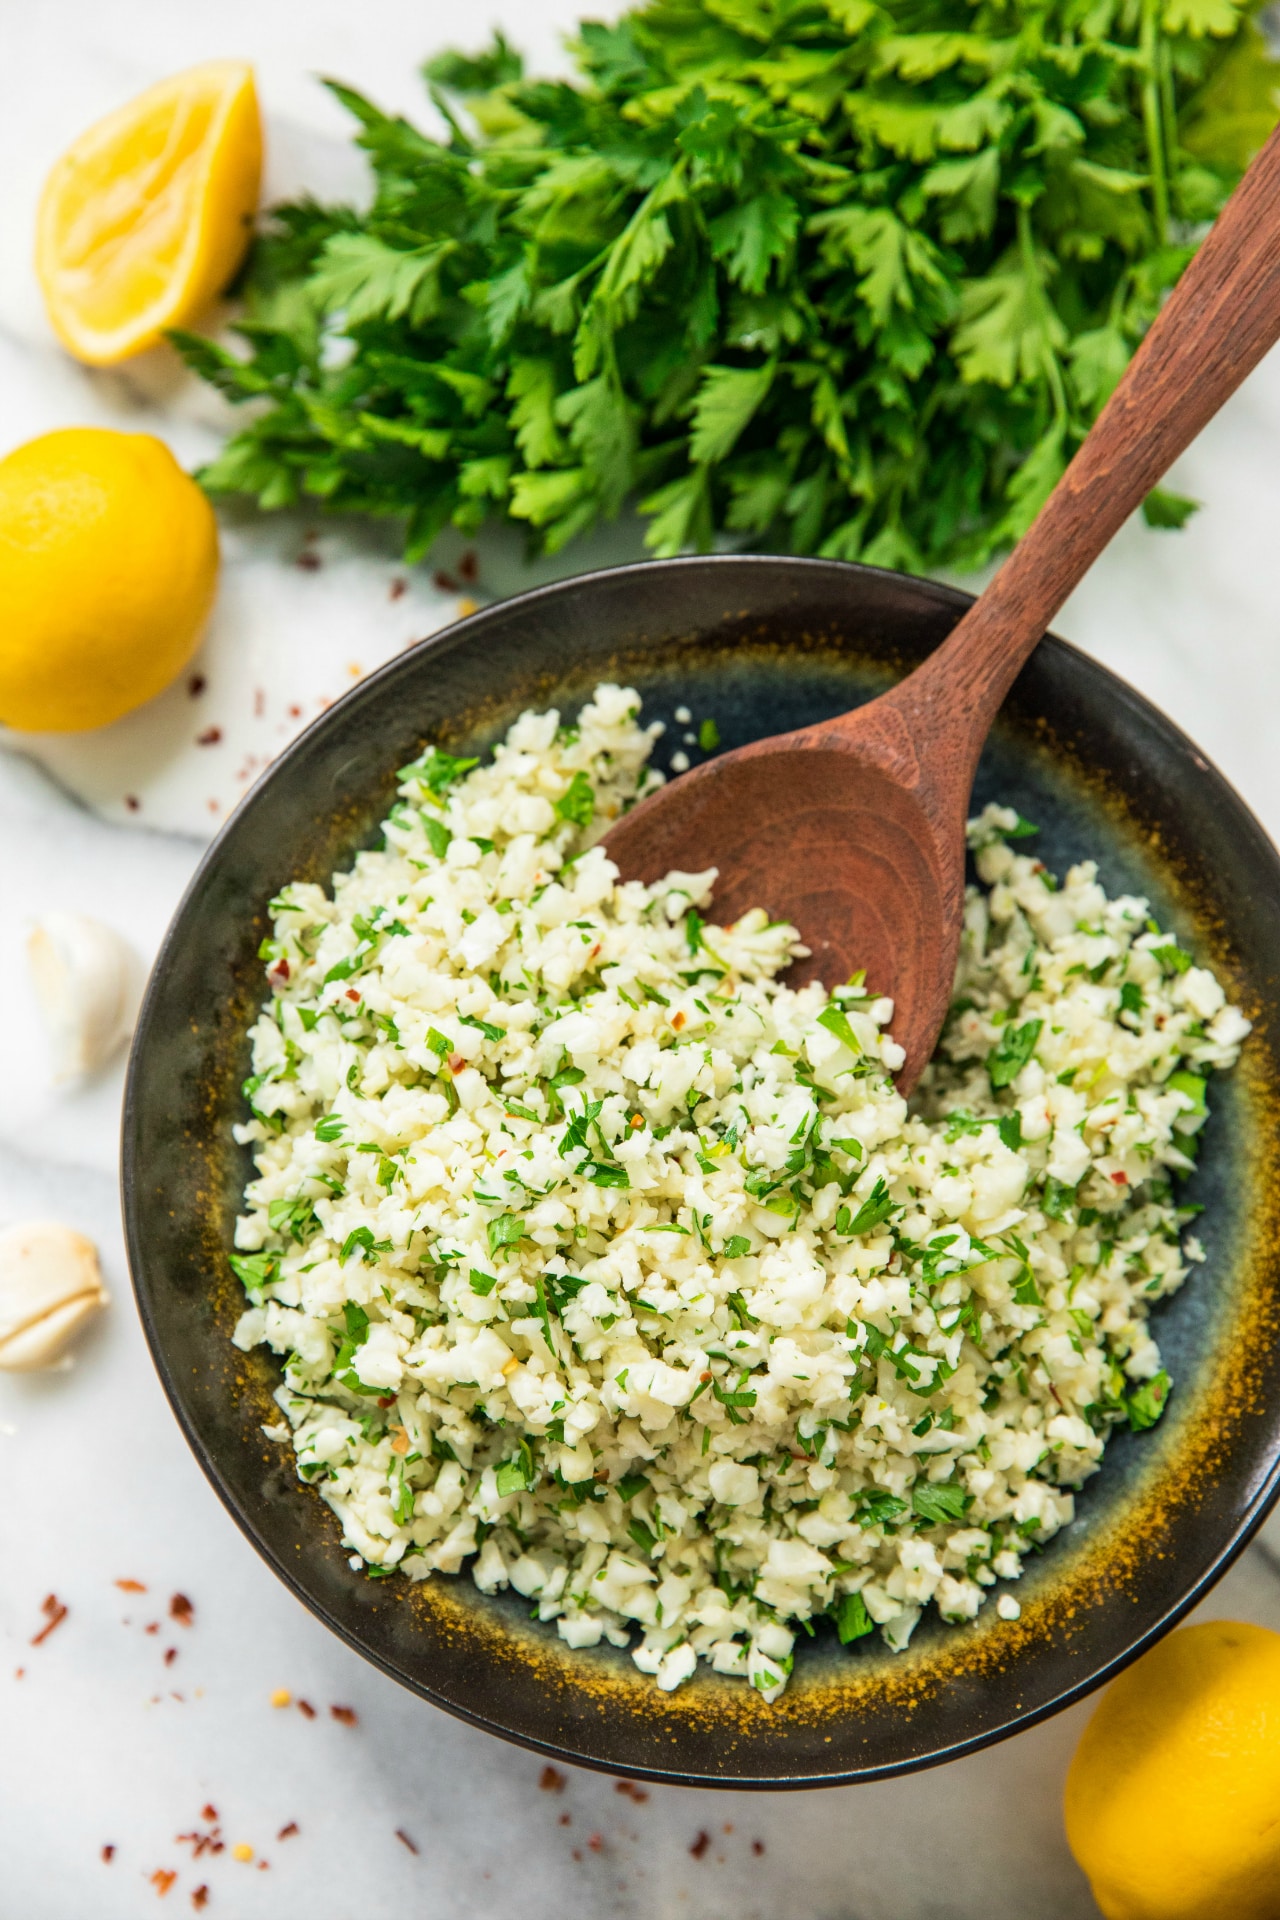 LOVE this easy to make Simple Lemon Parsley Cauliflower Rice!! Add some roasted salmon or grilled chicken on top and you have a wholesome, flavorful, and delicious gluten free meal!